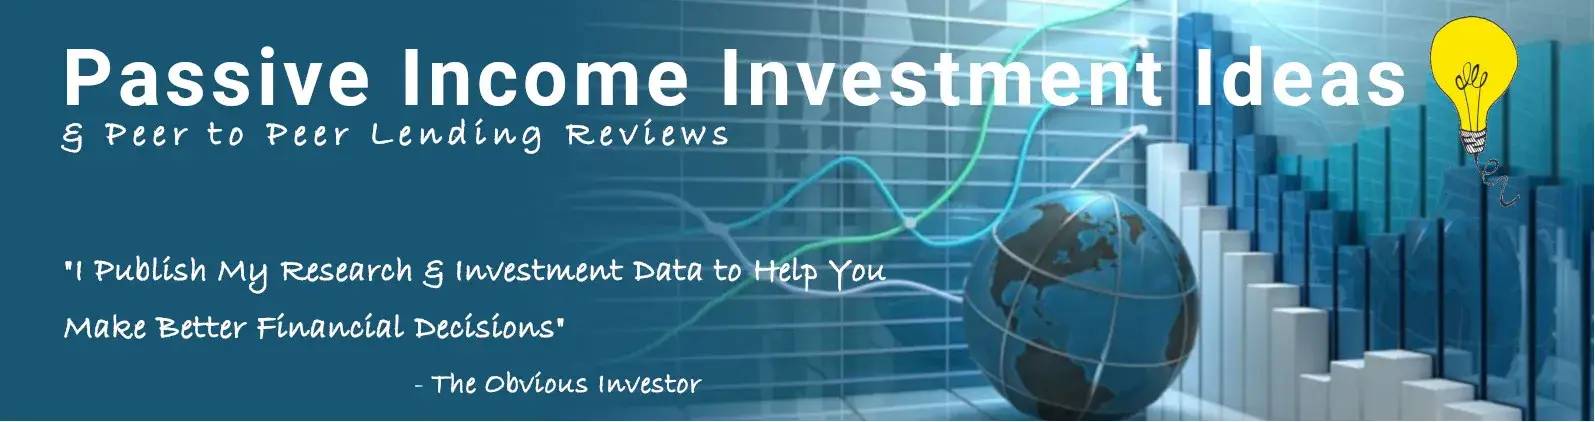 Passive Income Investment Ideas & Peer to Peer Lending Reviews - The Obvious Investor